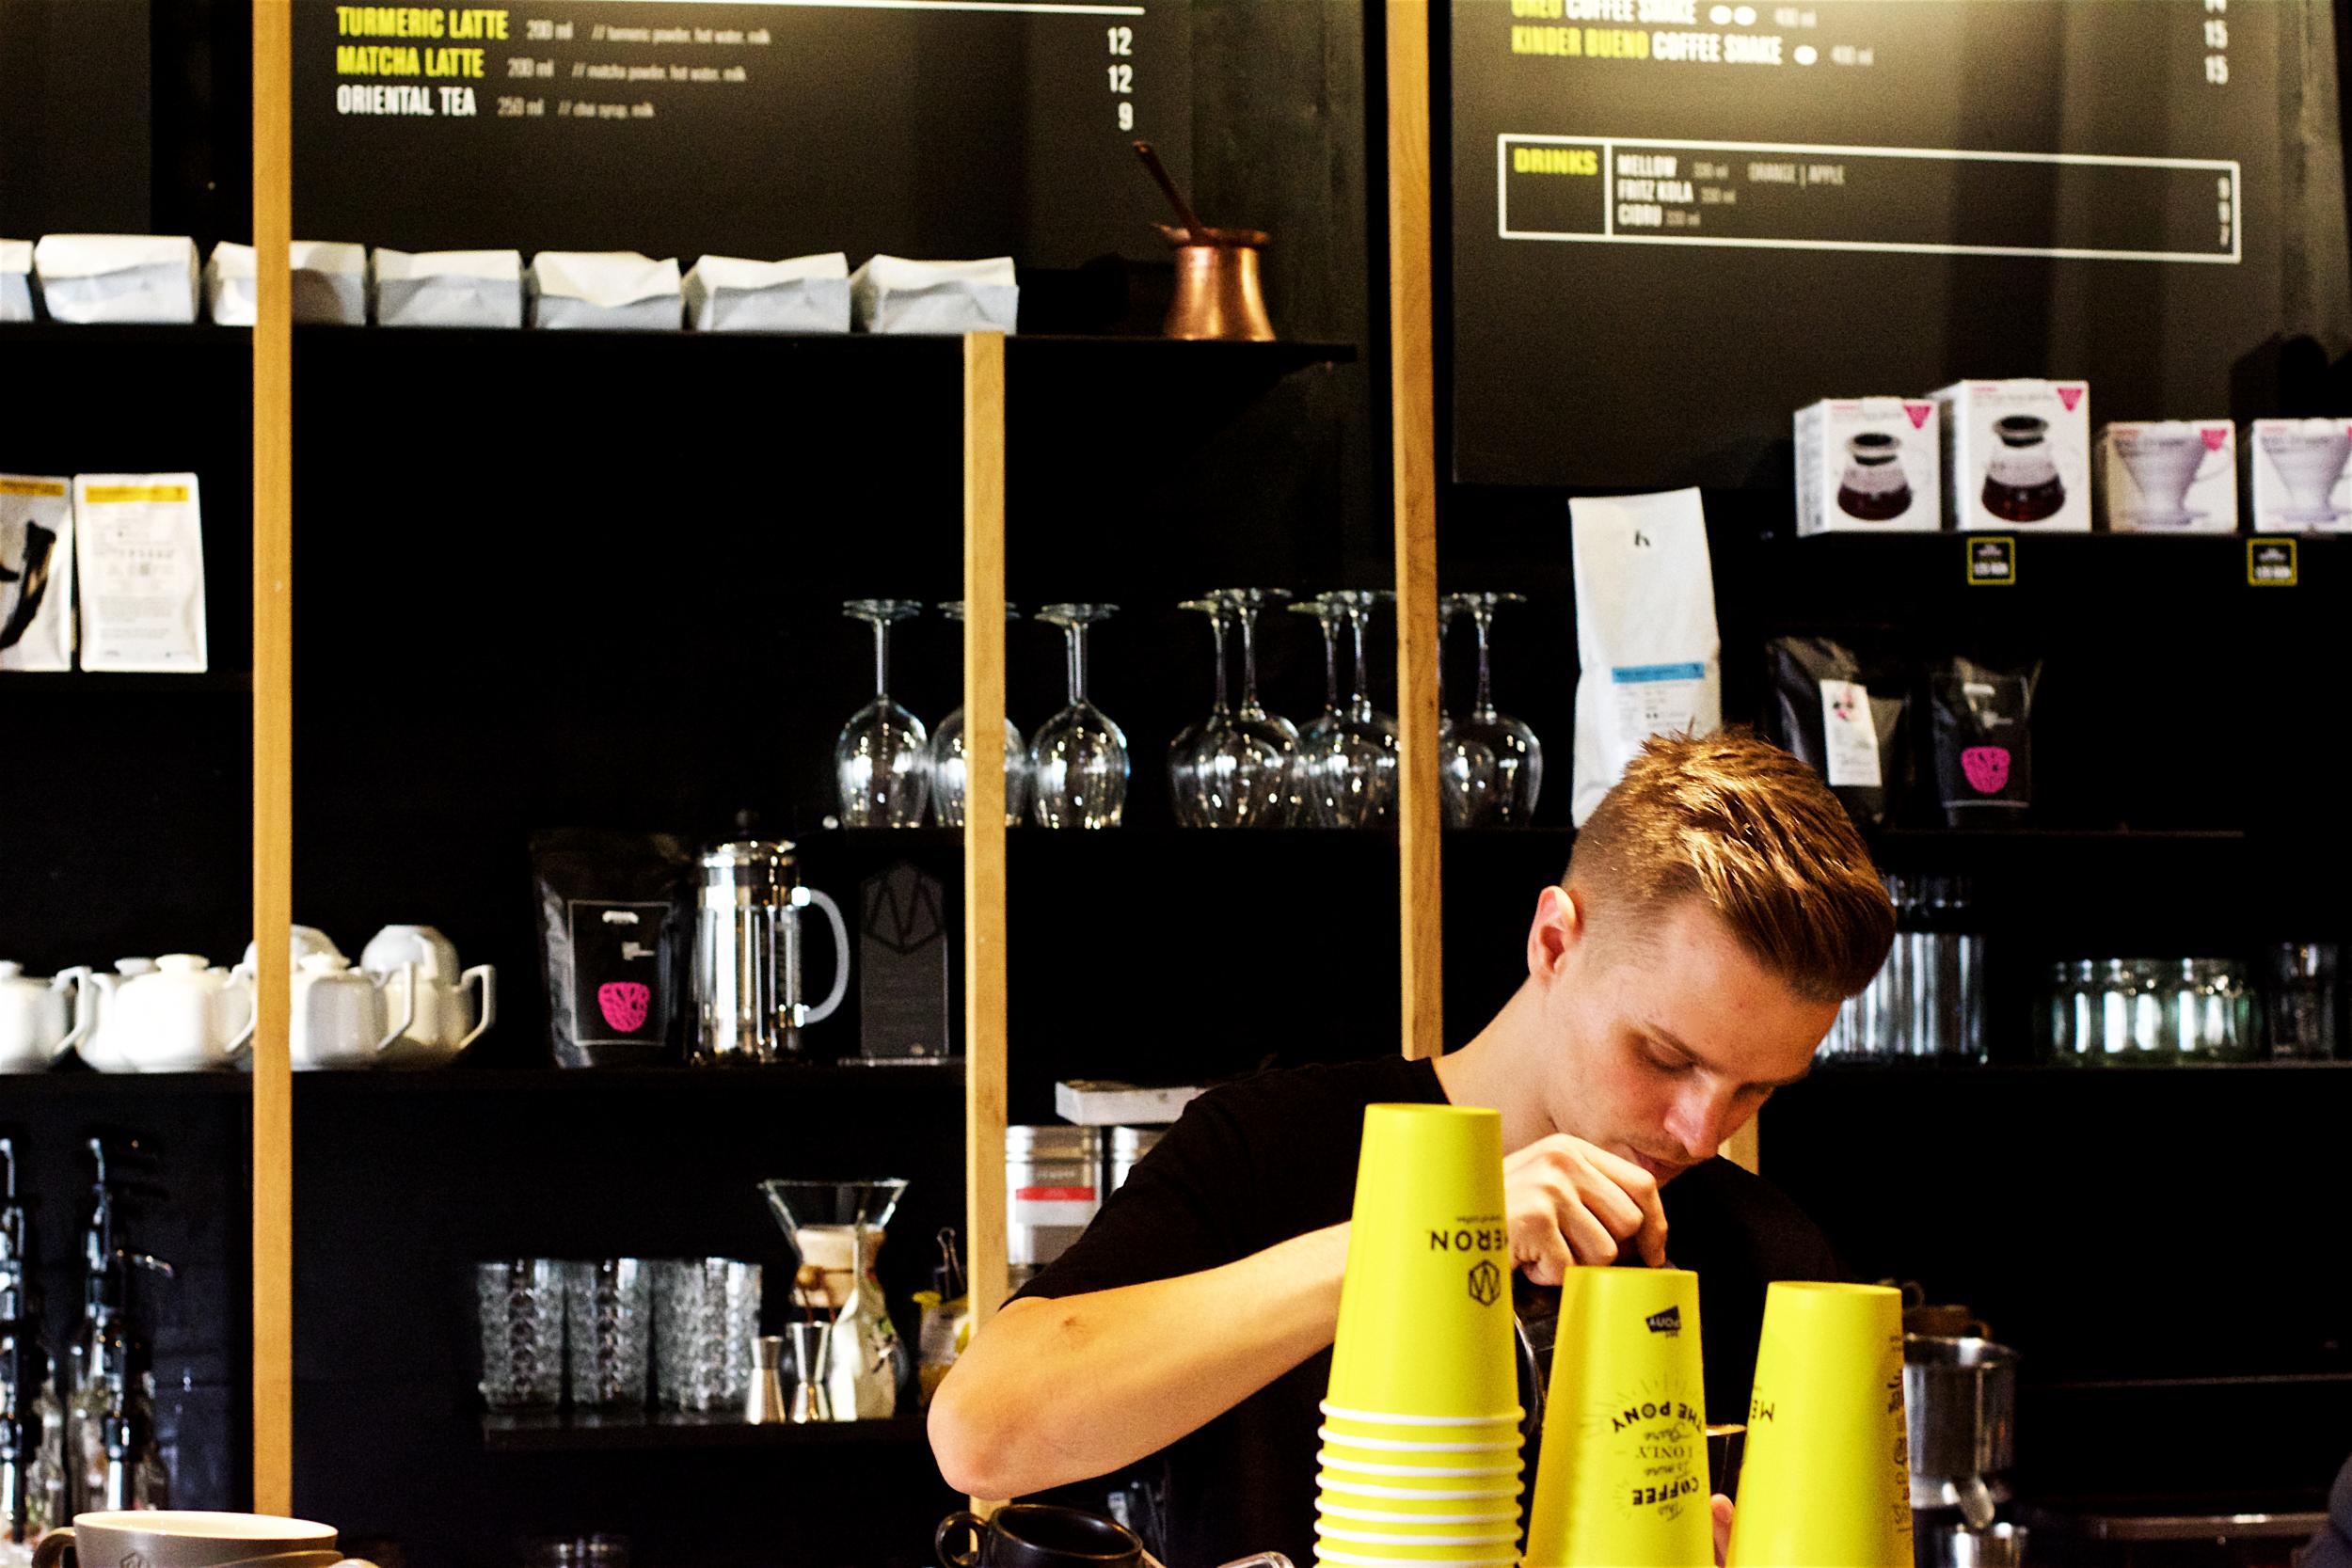 'Everyone working in coffee knows each other,' says the barista at Meron